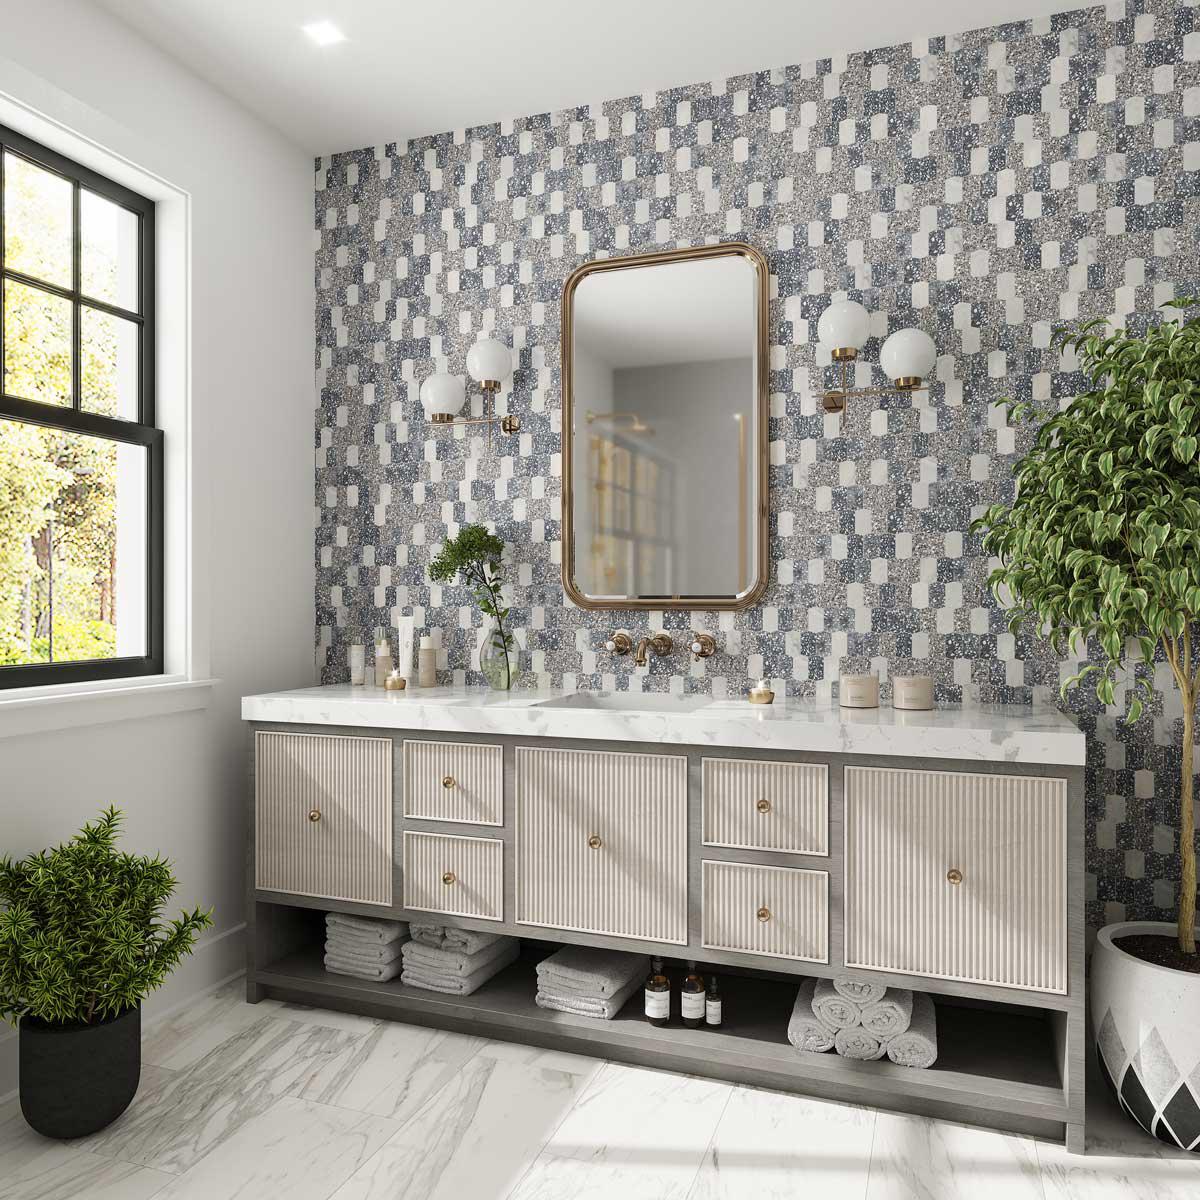 Gray and white bathroom with patterned picket wall tiles